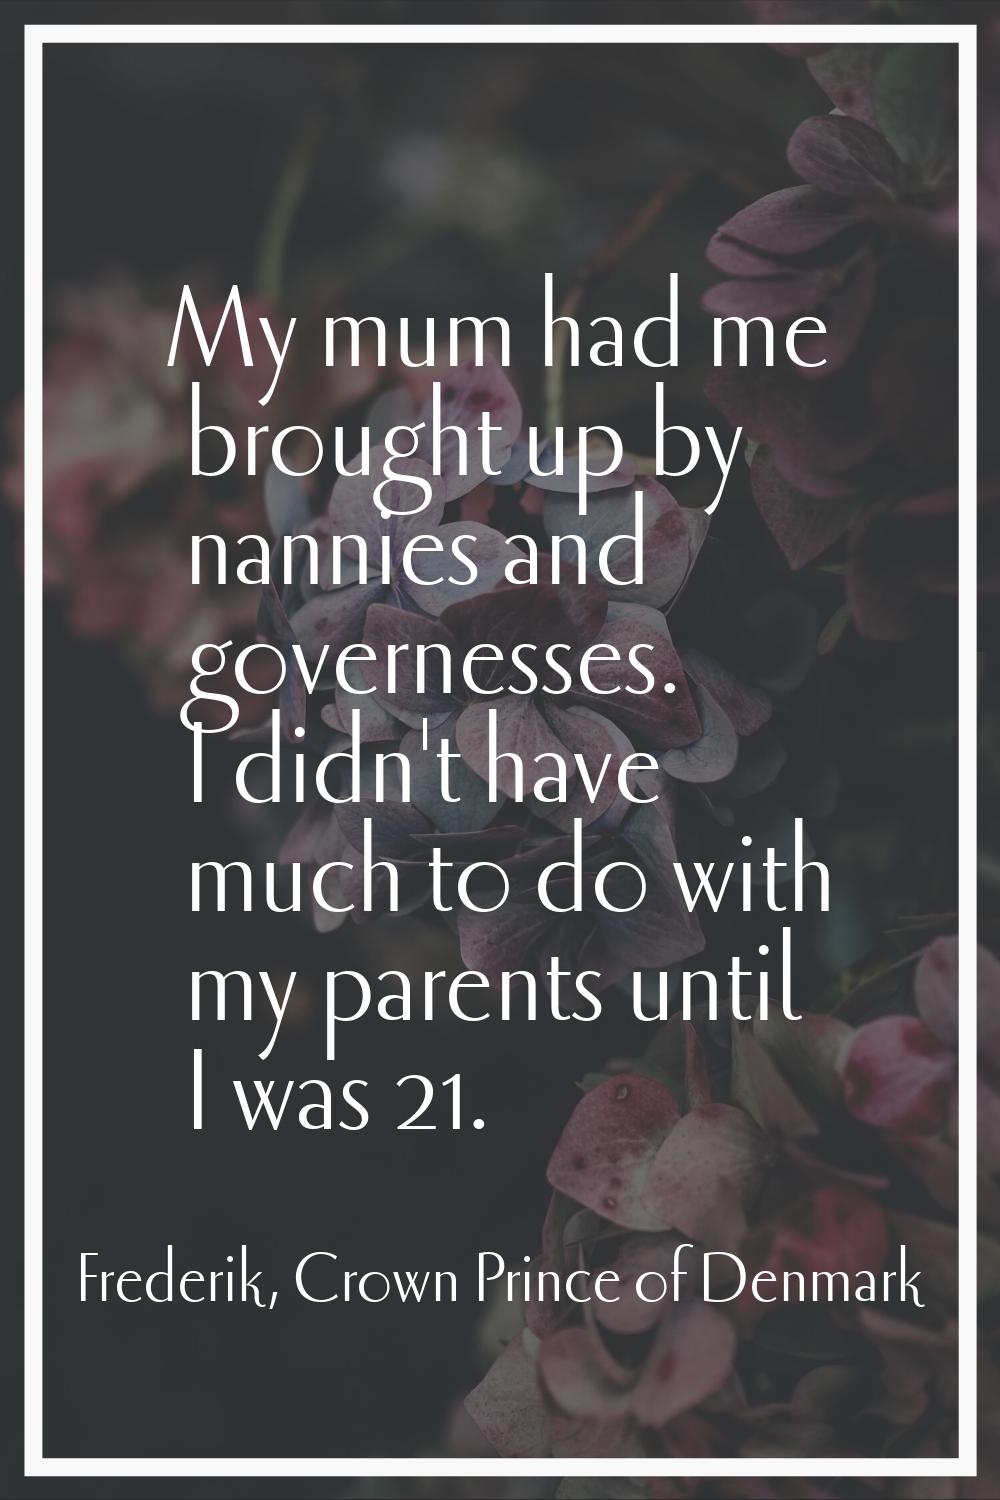 My mum had me brought up by nannies and governesses. I didn't have much to do with my parents until